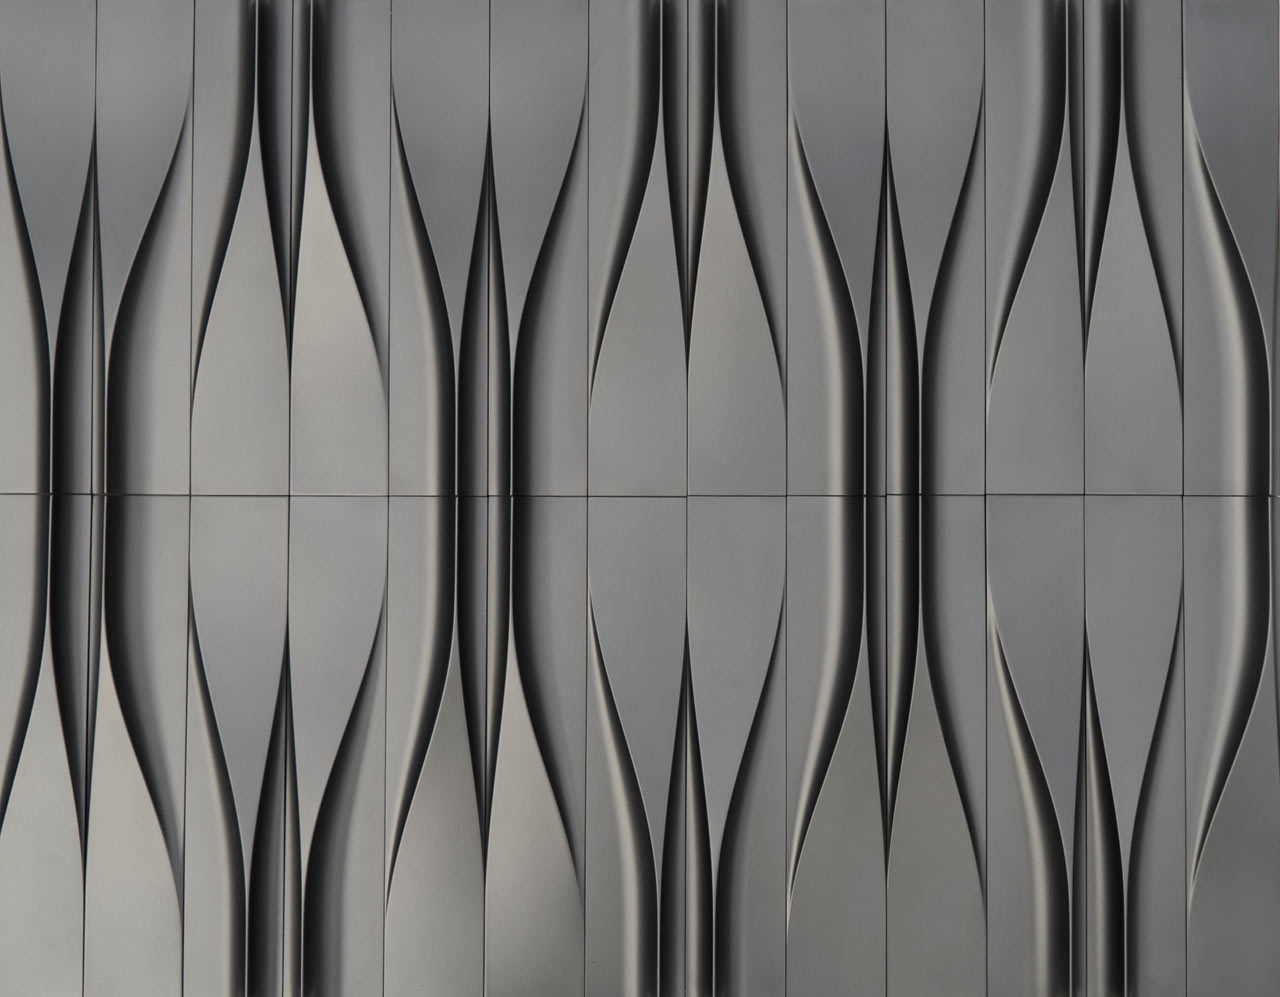 Concrete Tiles Inspired by its Original, Liquid Form